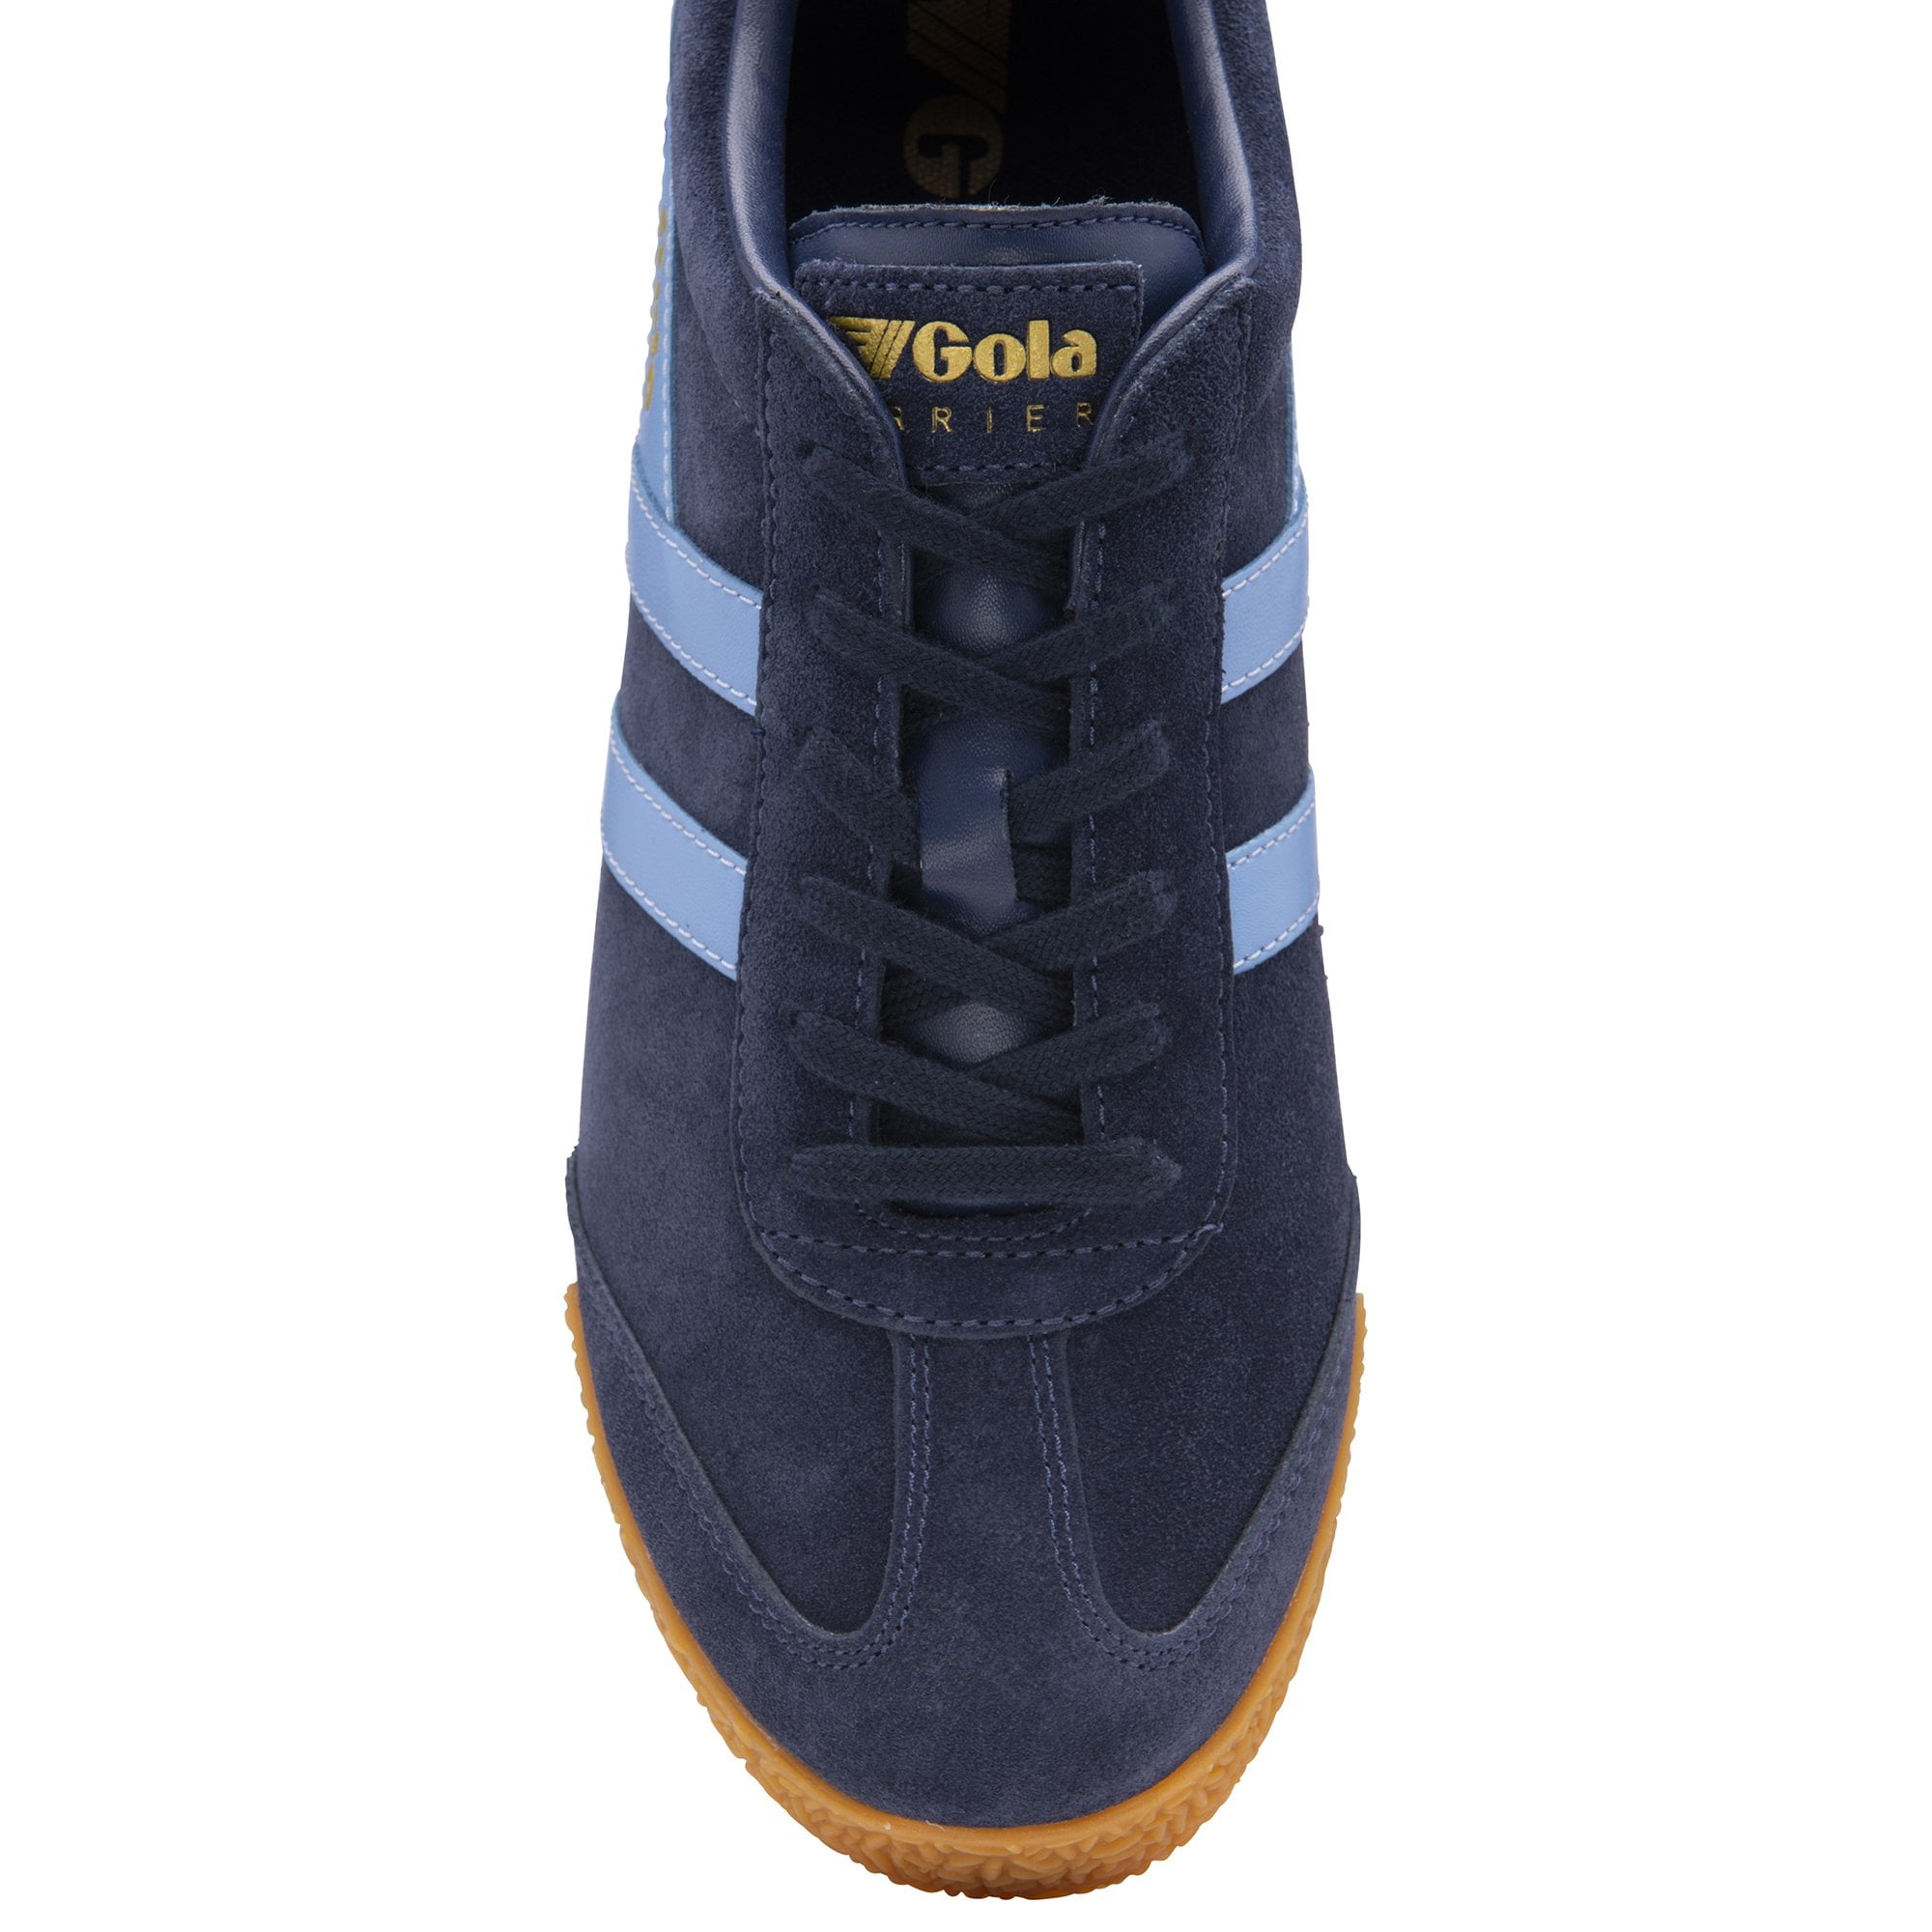 Gola Harrier Mens Navy And Cornflower Suede Lace Up Trainers